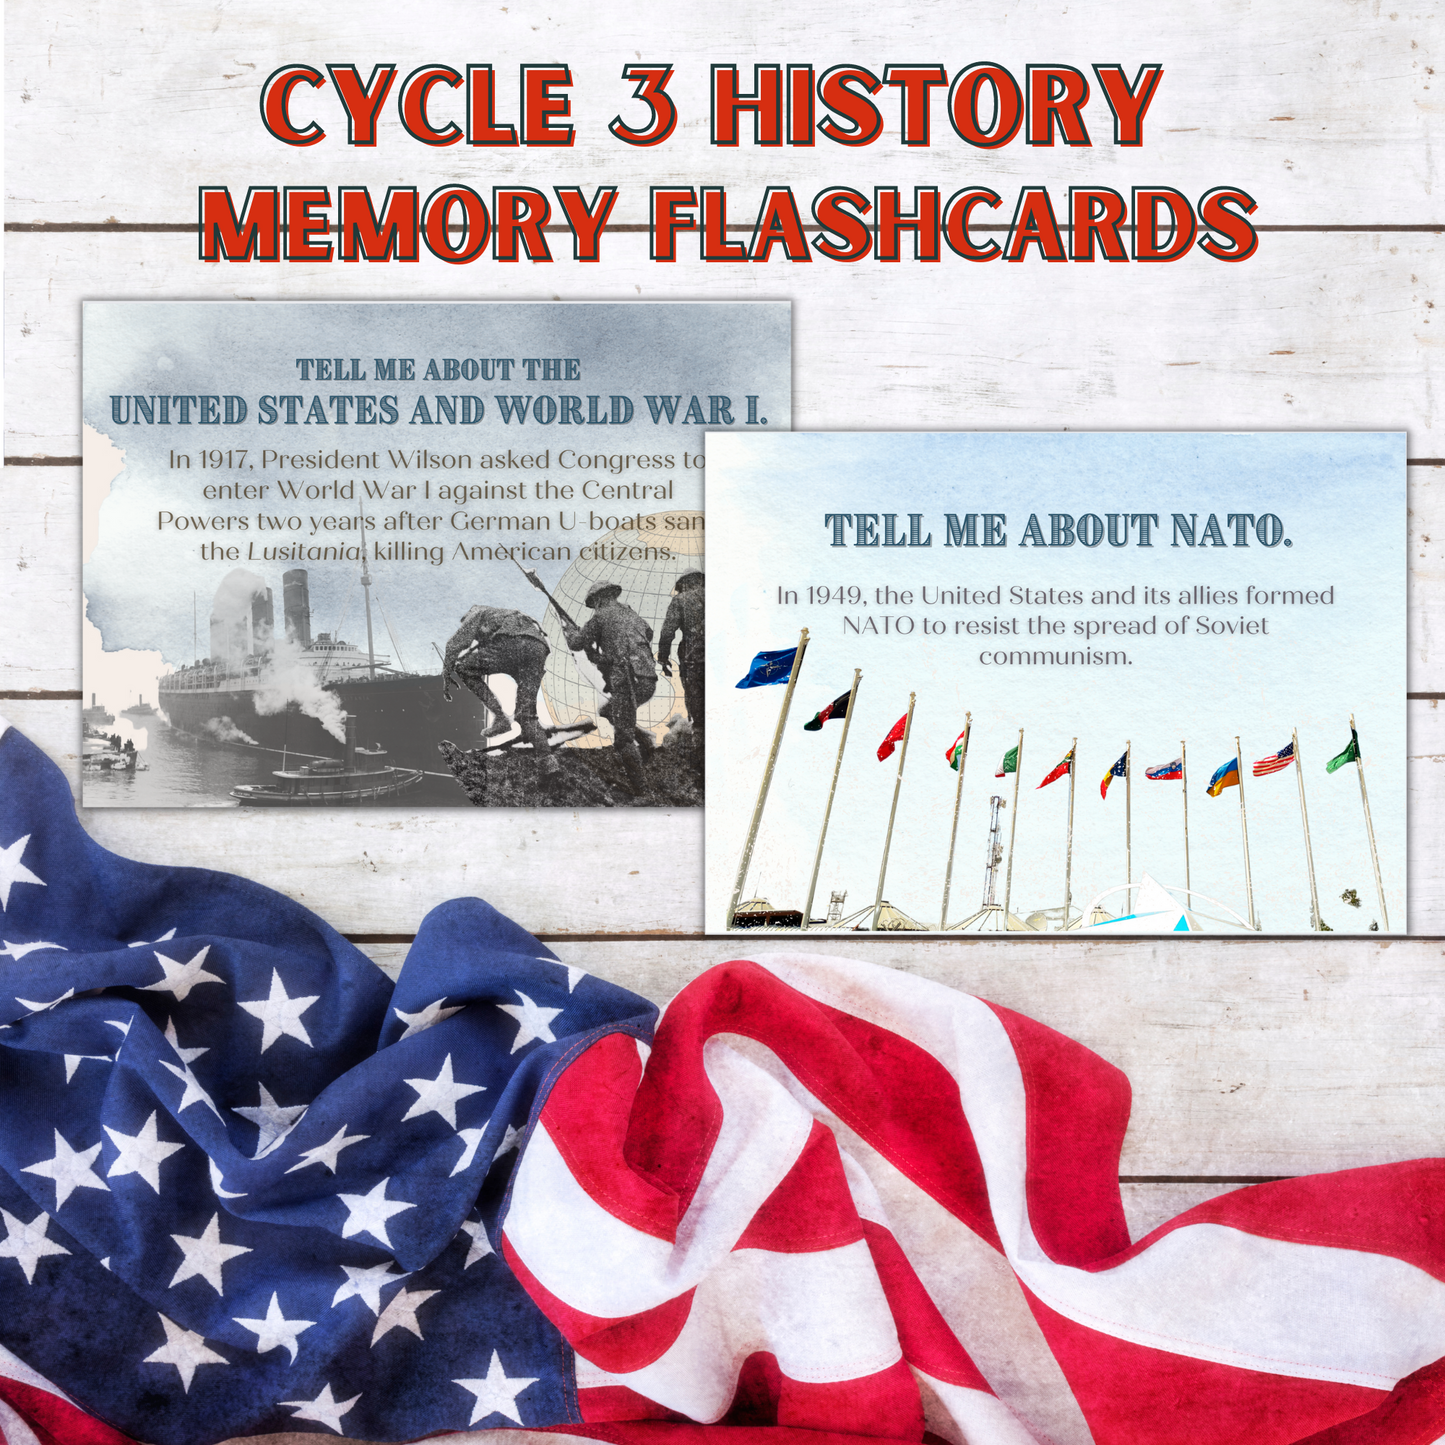 History Flashcards | CC Cycle 3